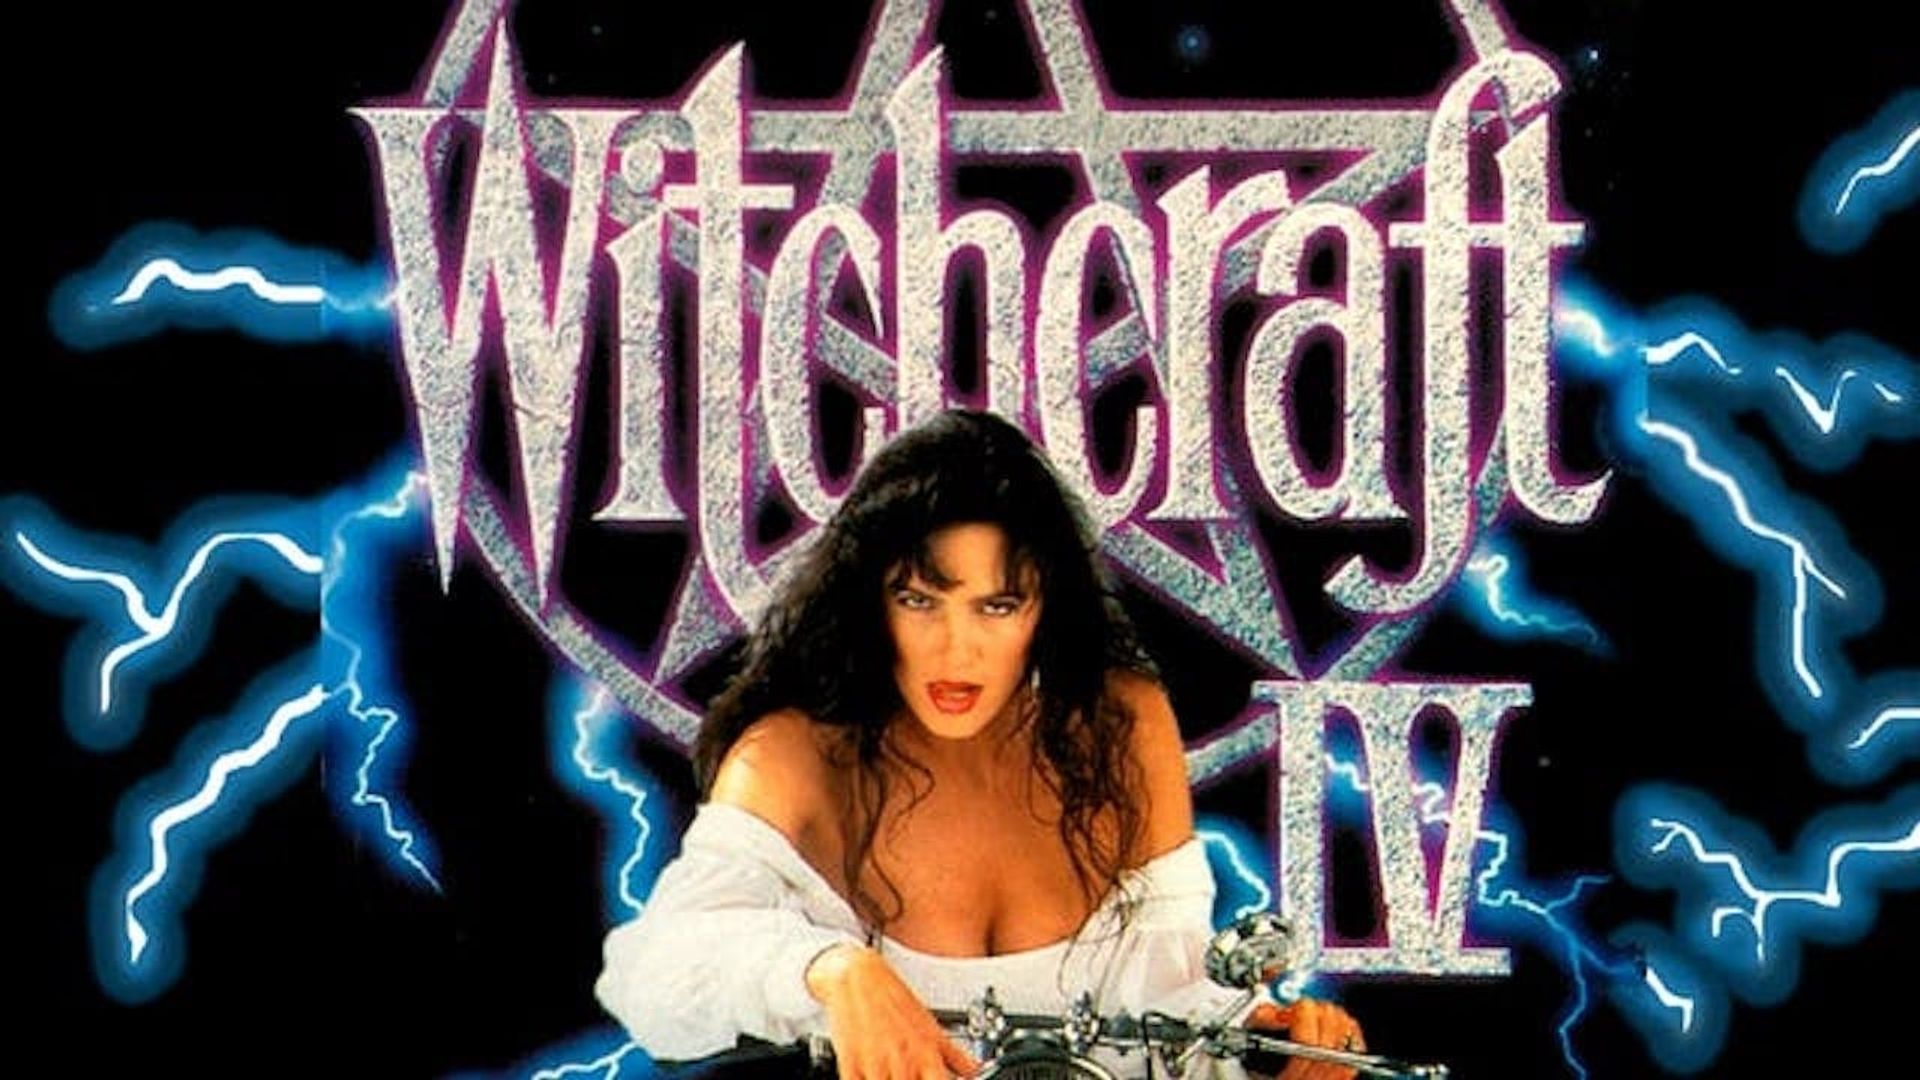 Witchcraft IV: The Virgin Heart background